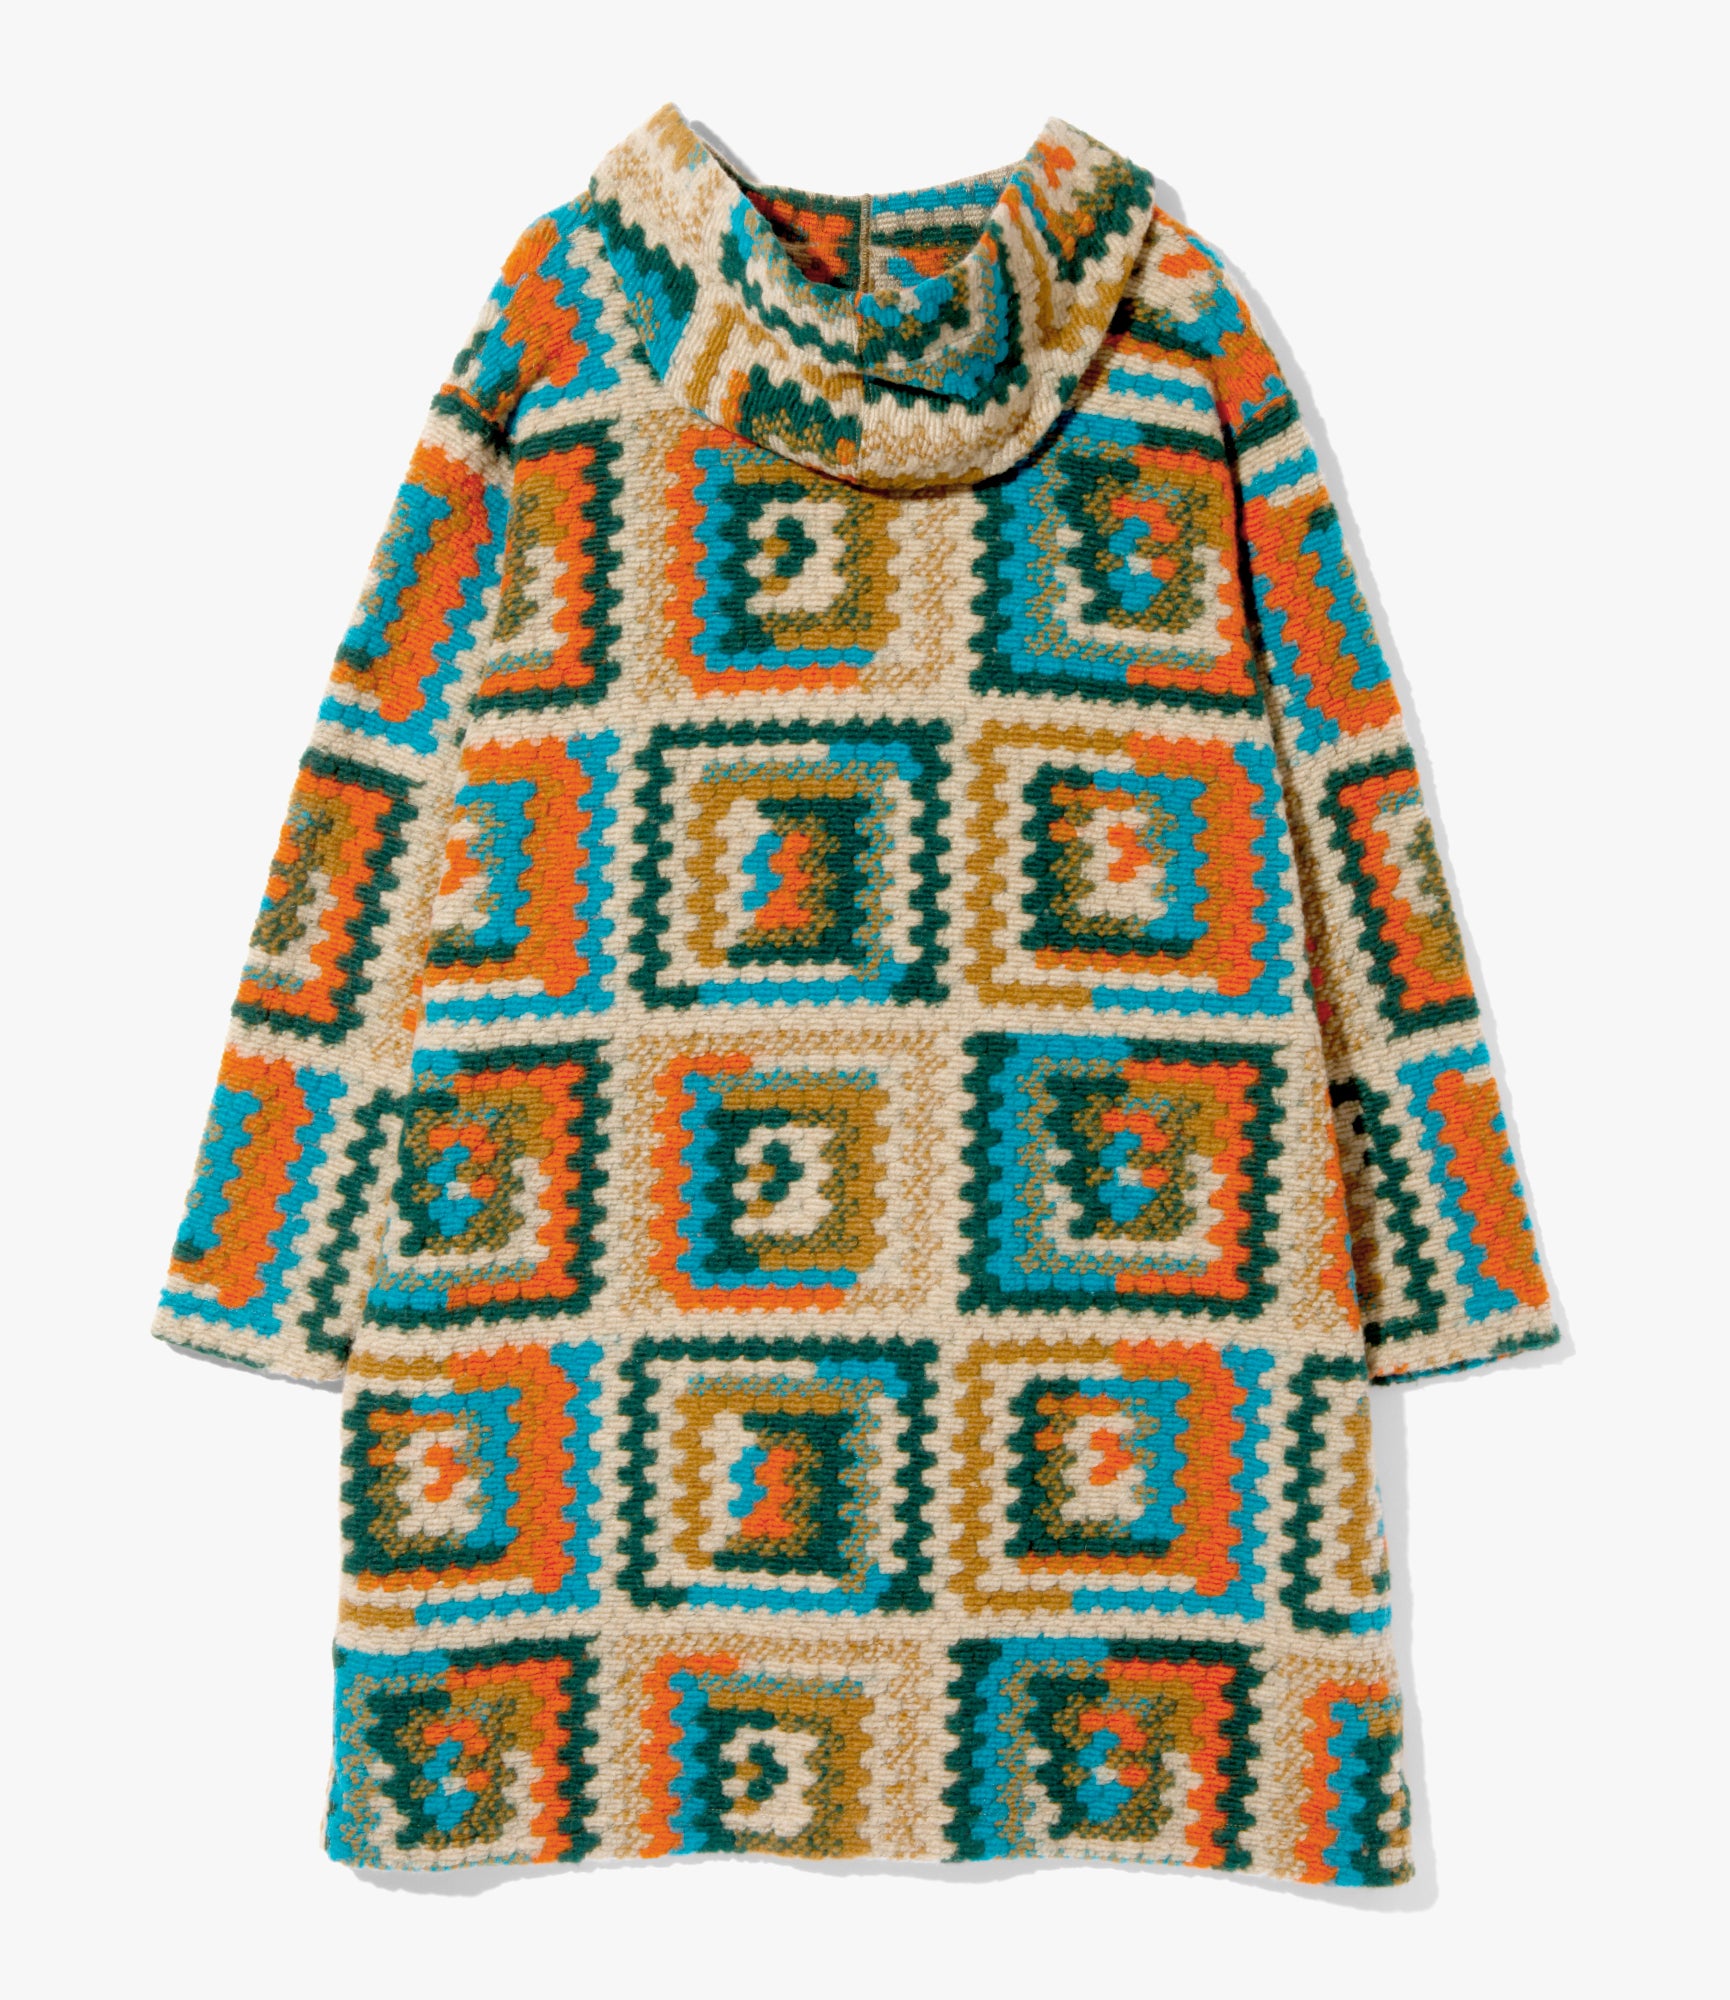 Engineered Garments Knit Robe - Multi Color Poly Wool Crochet Knit